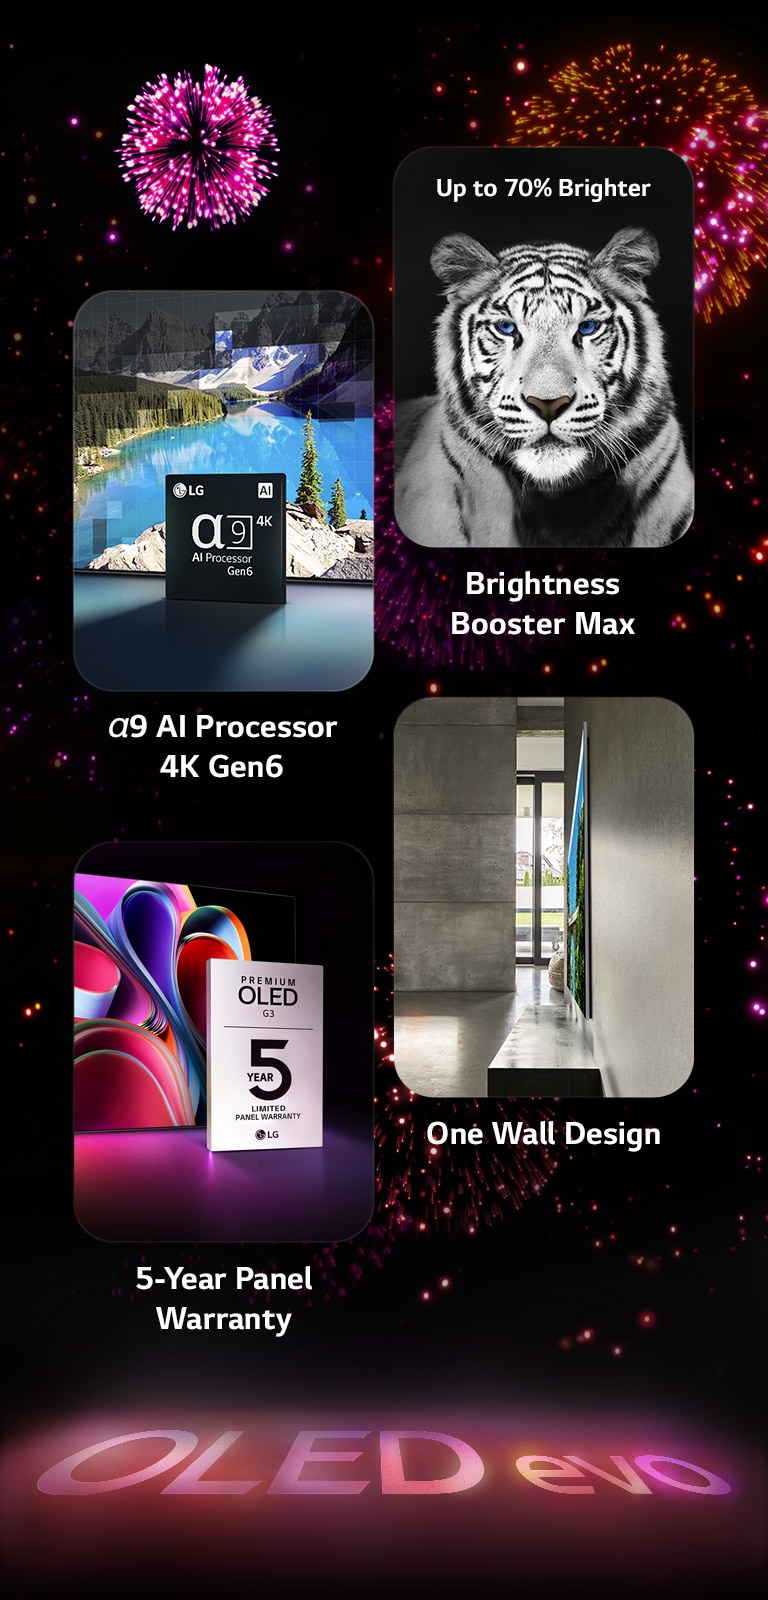   "An image presenting the key features of the LG OLED evo G3 against a black background with a pink and purple firework display. The pink reflection from the firework display on the ground shows the words ""OLED evo."" Within the picture, an image depicting the α9 AI Processor 4K Gen6 shows the chip standing before a picture of a lake scene being remastered with the processing technology. An image presenting Brightness Booster Max shows a tiger with deep contrast and bright whites. An image presenting the 5-Year Panel Warranty shows the Premium OLED G3 warranty logo with the display in the backdrop. An image presenting One Wall Design shows LG OLED evo G3 flush against the wall in a grey industrial living space. 	  "